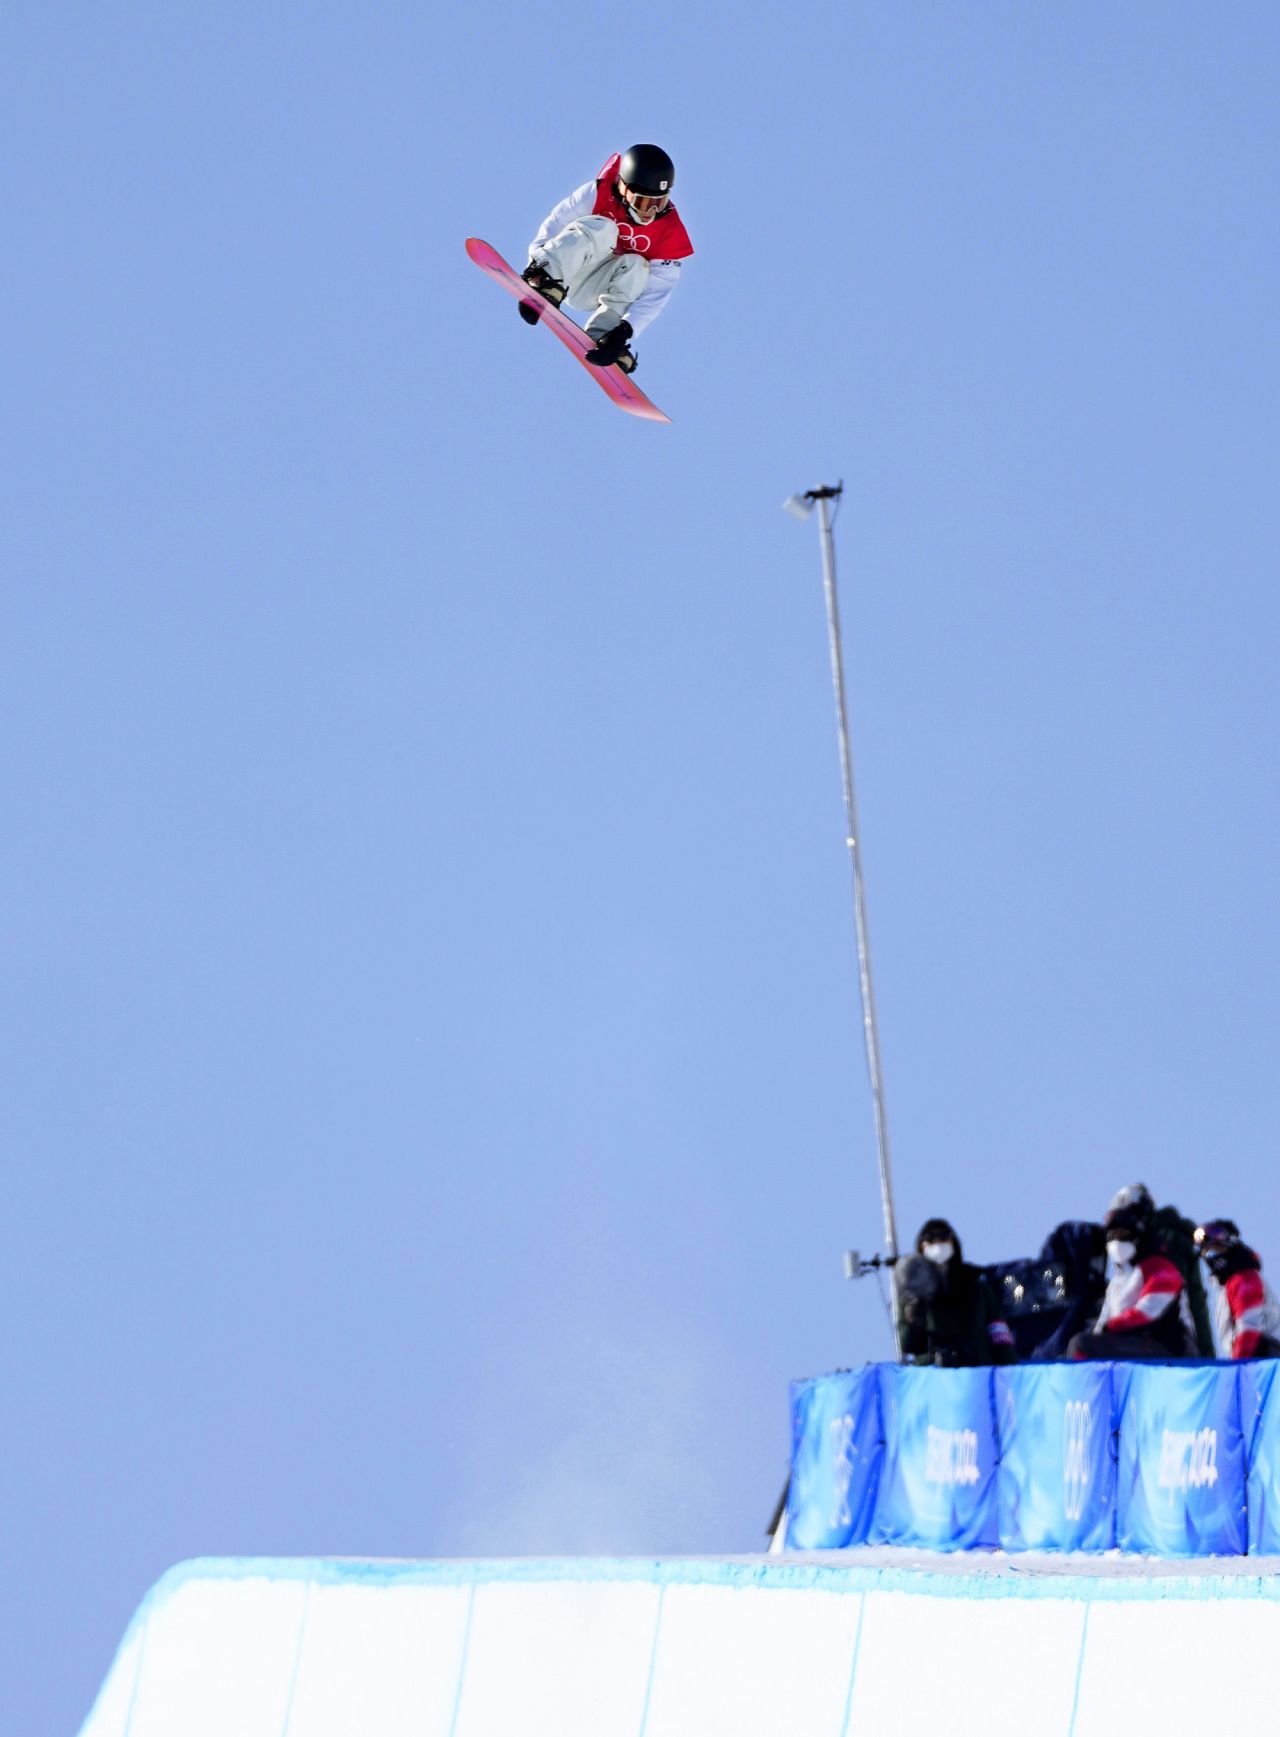 Japanese snowboarder Ayumu Hirano flies above the halfpipe <a href="https://www.cnn.com/world/live-news/beijing-winter-olympics-02-11-22-spt/h_674f3daf6b4fc4d00976b8f5429ba481" target="_blank">on his way to winning the gold medal</a> on February 11. On each of his three runs, Hirano landed a triple cork — a three-flip trick that had never even been attempted before in an Olympic final. 